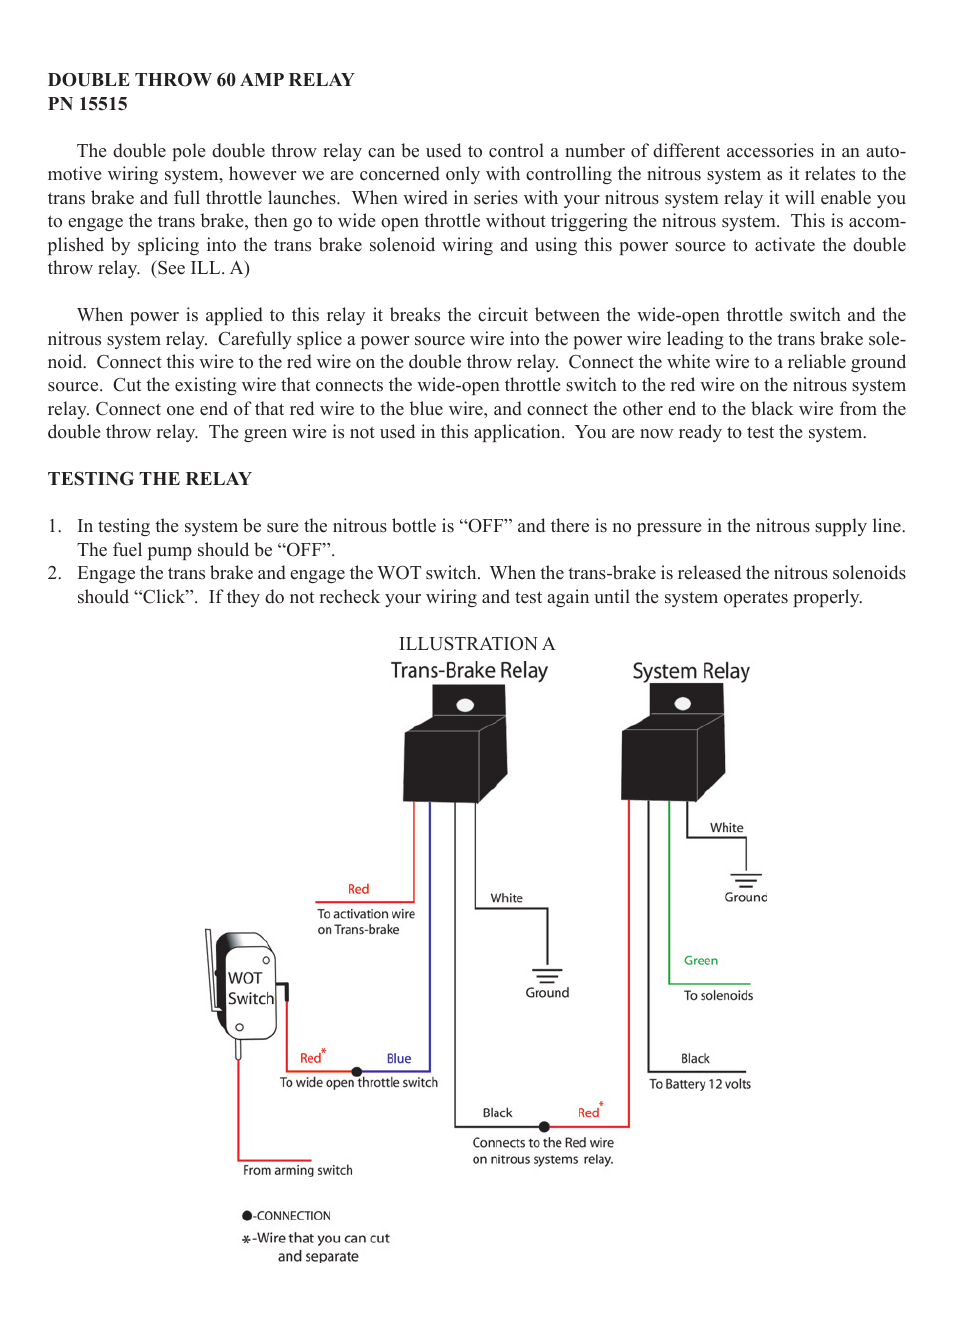 Nitrous Express DOUBLE THROW 60 AMP RELAY (15515
) User Manual | 1 page